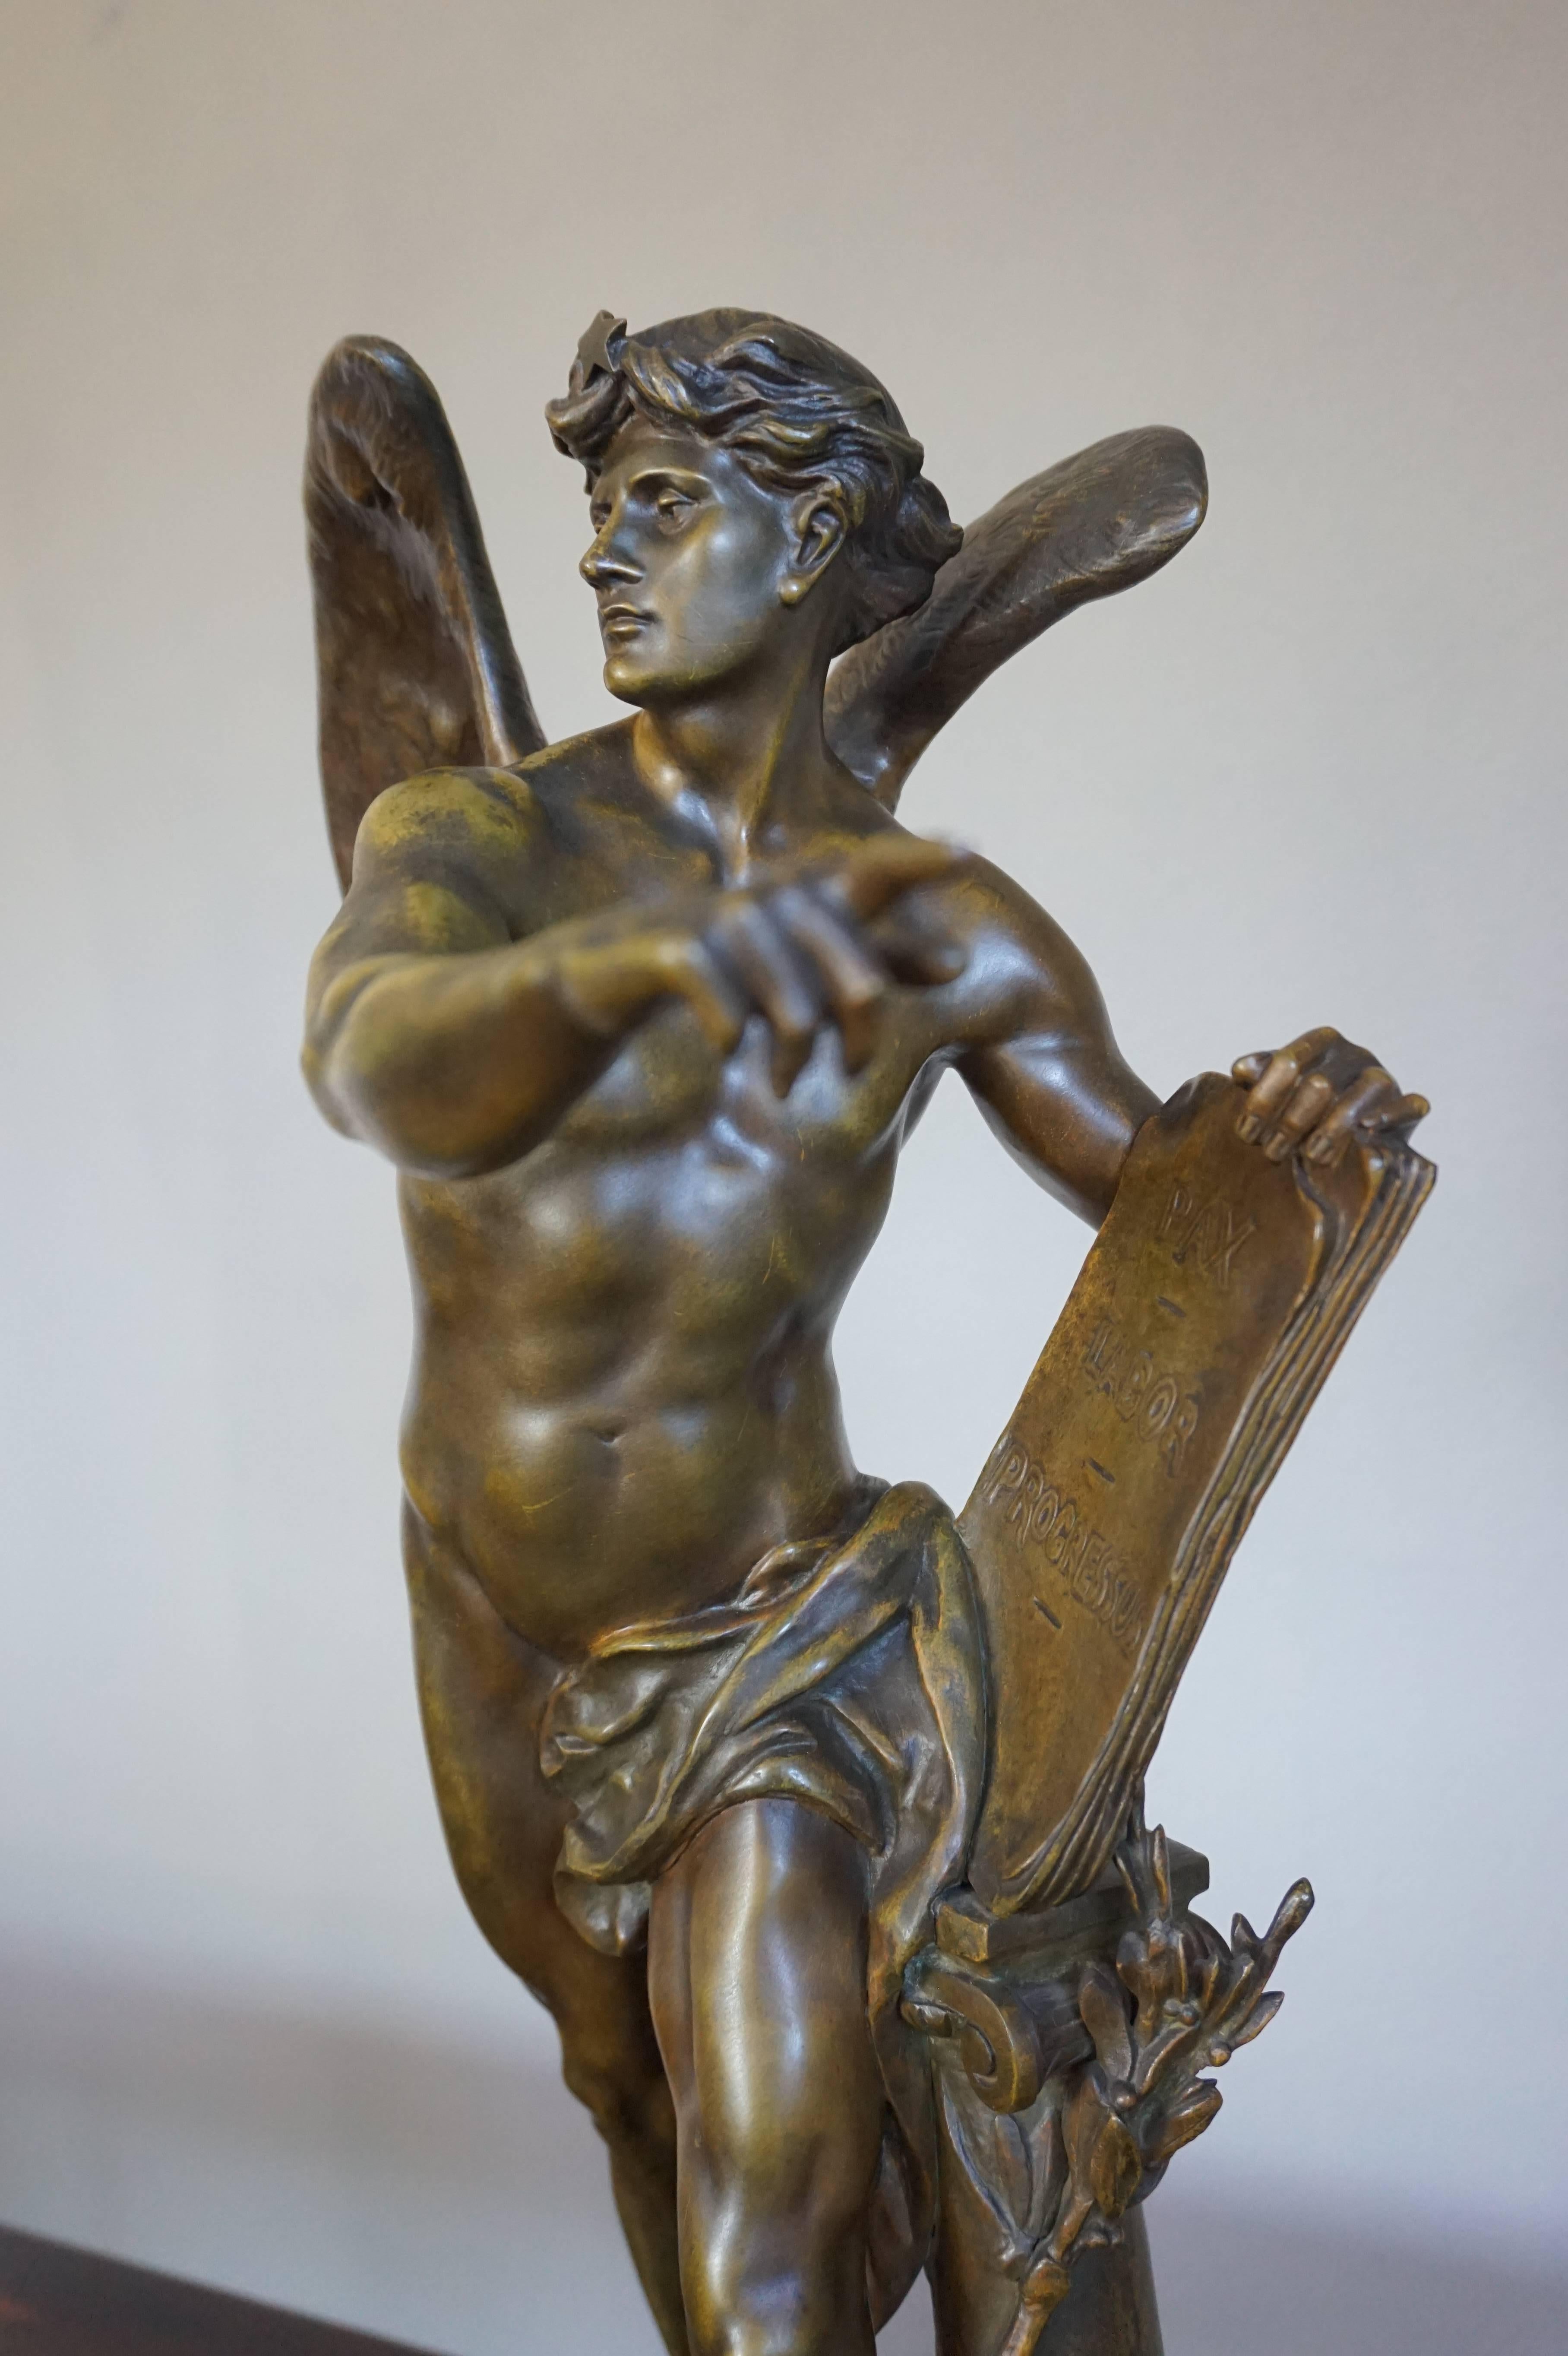 Antique and rare bronze statue.

If you find it hard to get inspired in everyday life then surround yourself with art that will. There is definitely beauty, honesty, grace and wisdom in this stunning work of art. The way in which Emil Louis